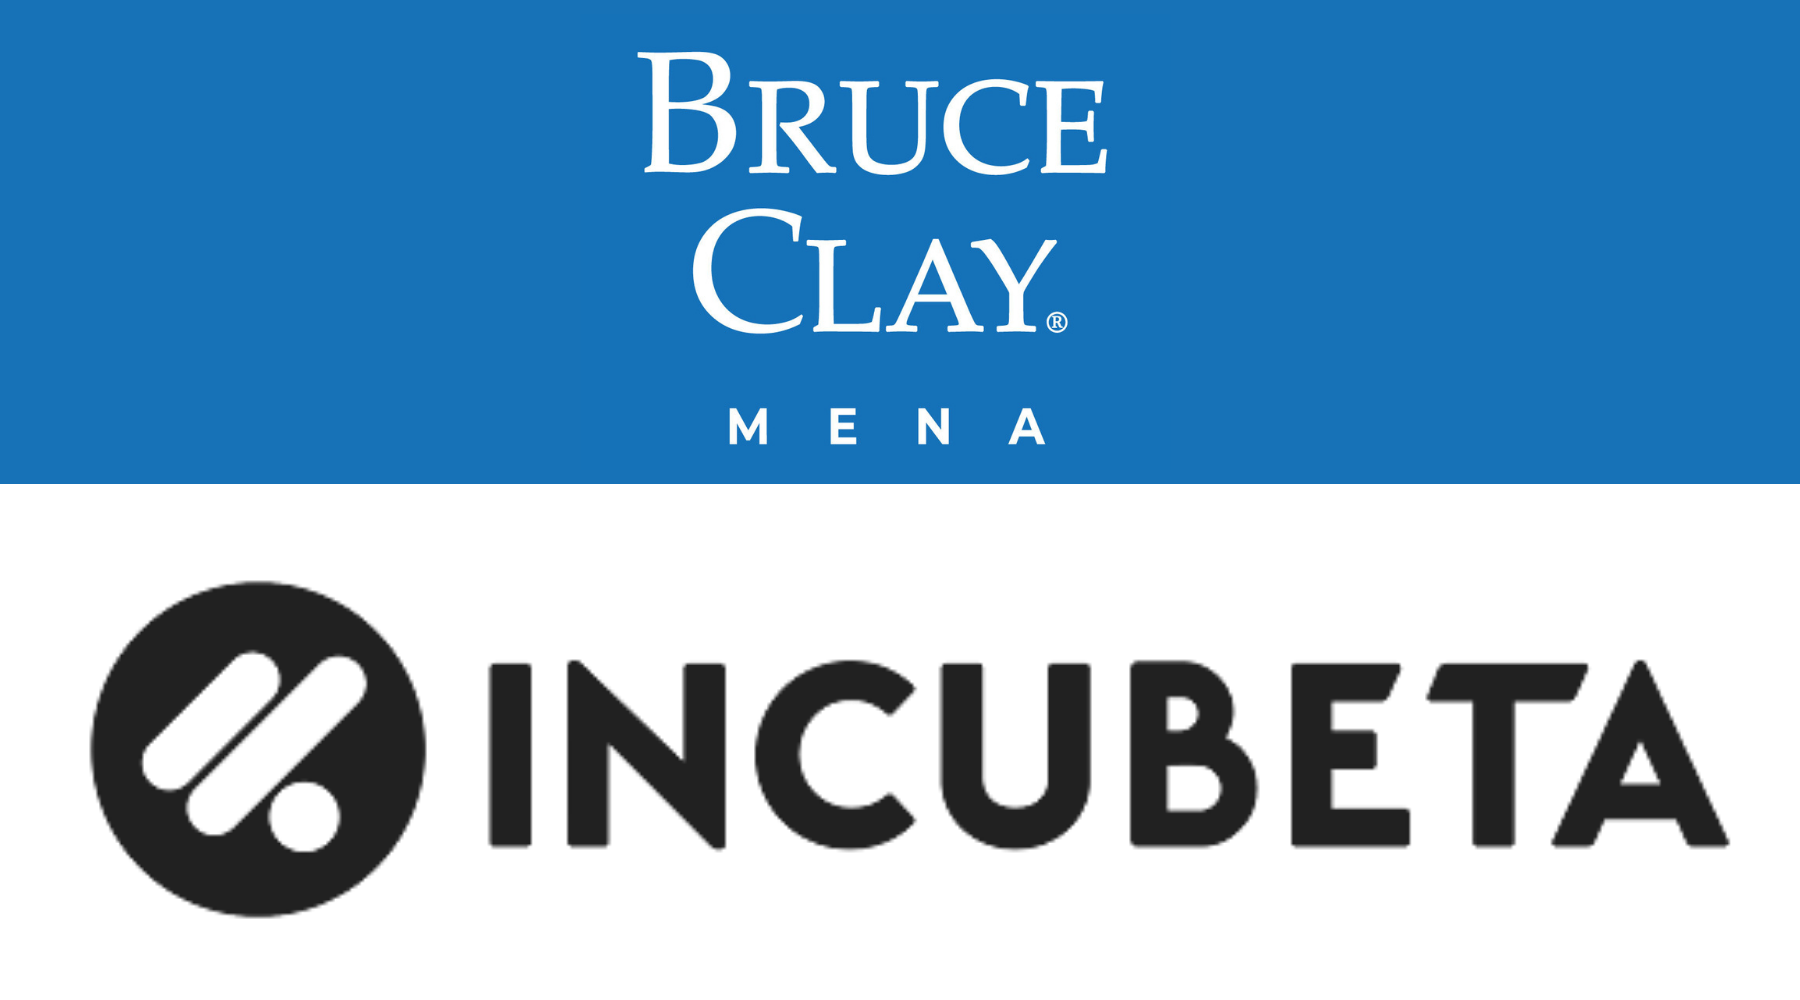 Incubeta Acquires Bruce Clay MENA As Part of Global Expansion Strategy